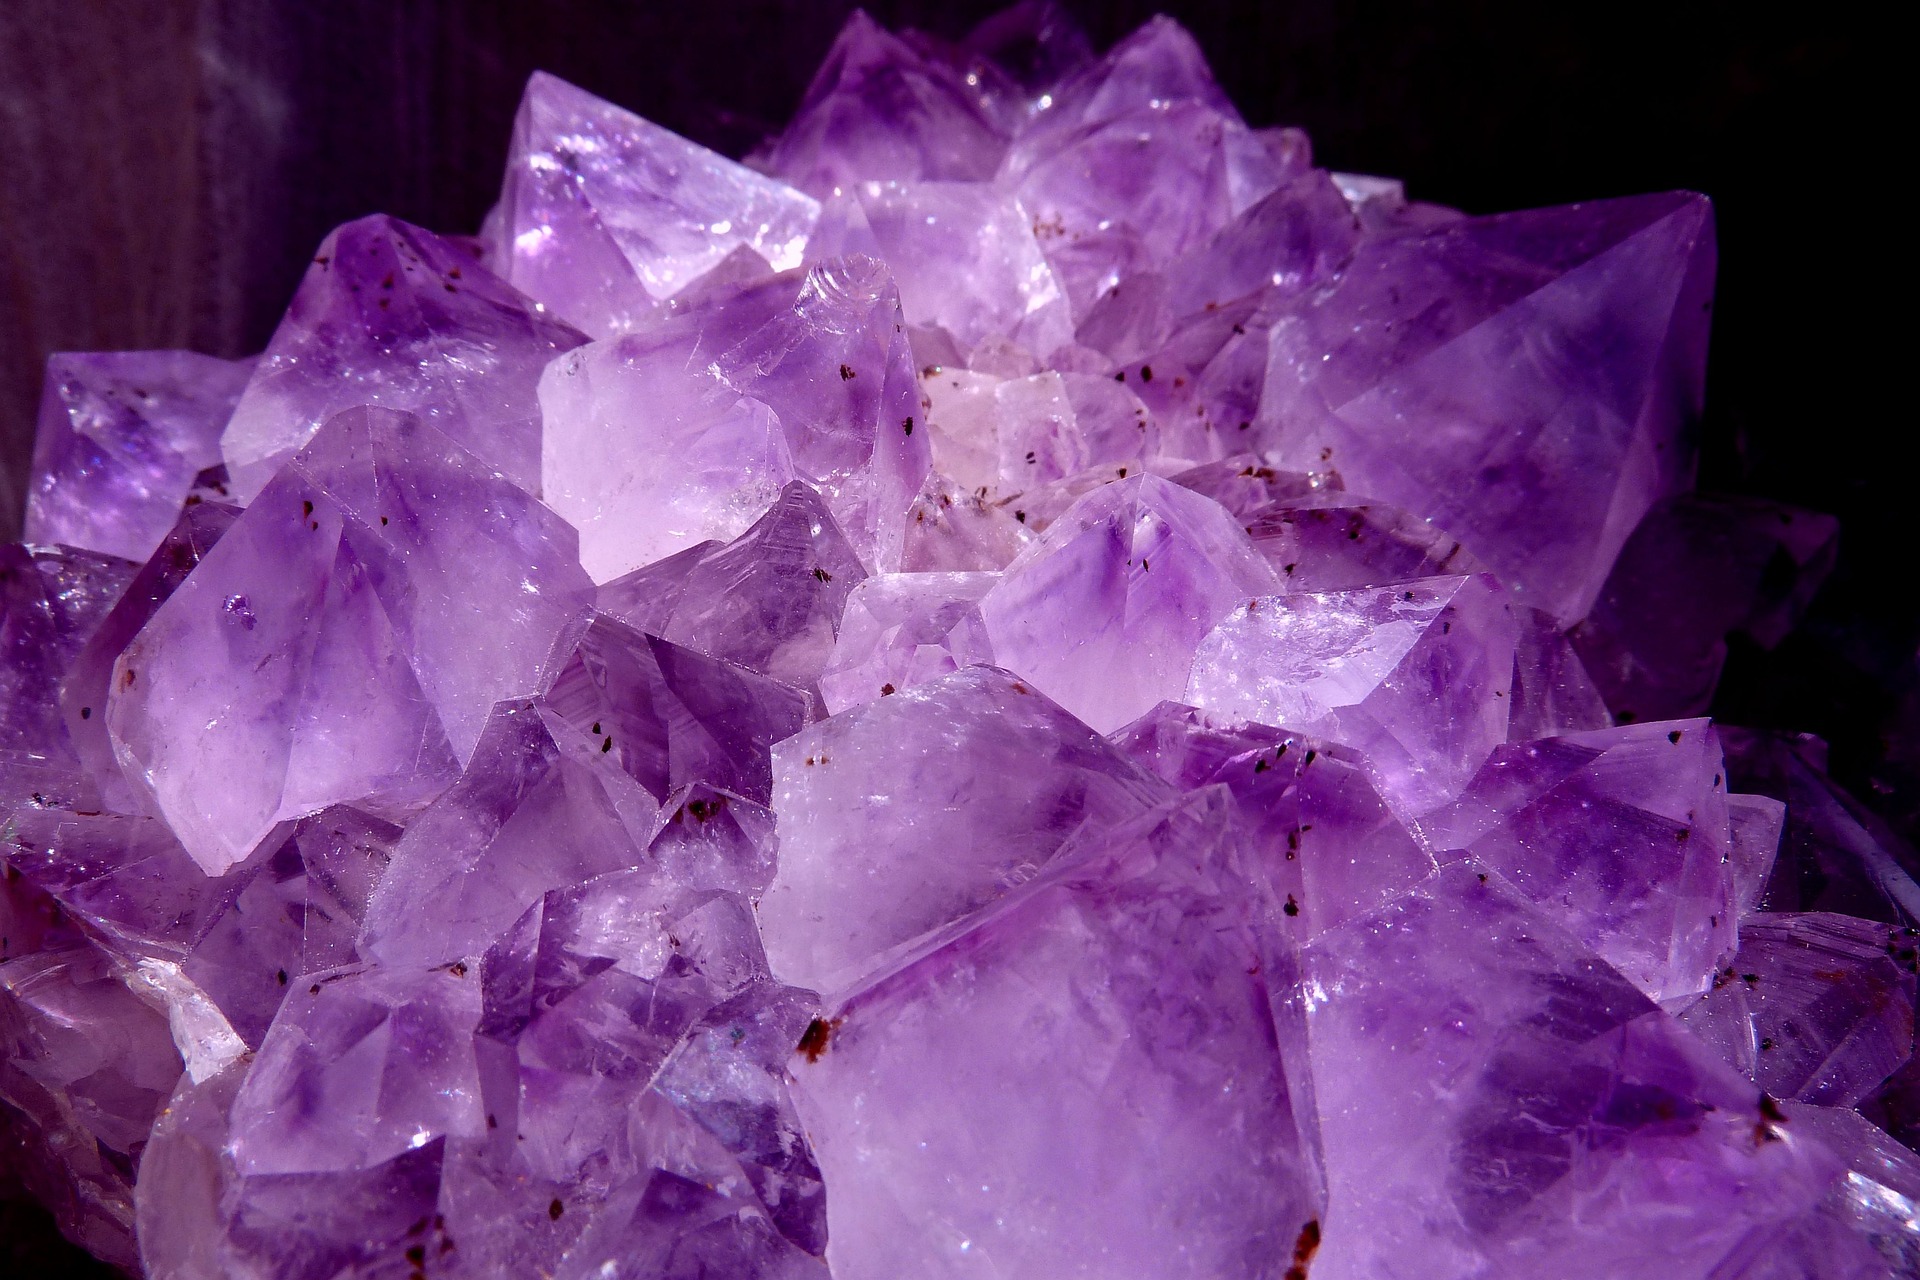 Crystal Biblical Meaning - What Does The Bible Say About Crystals?